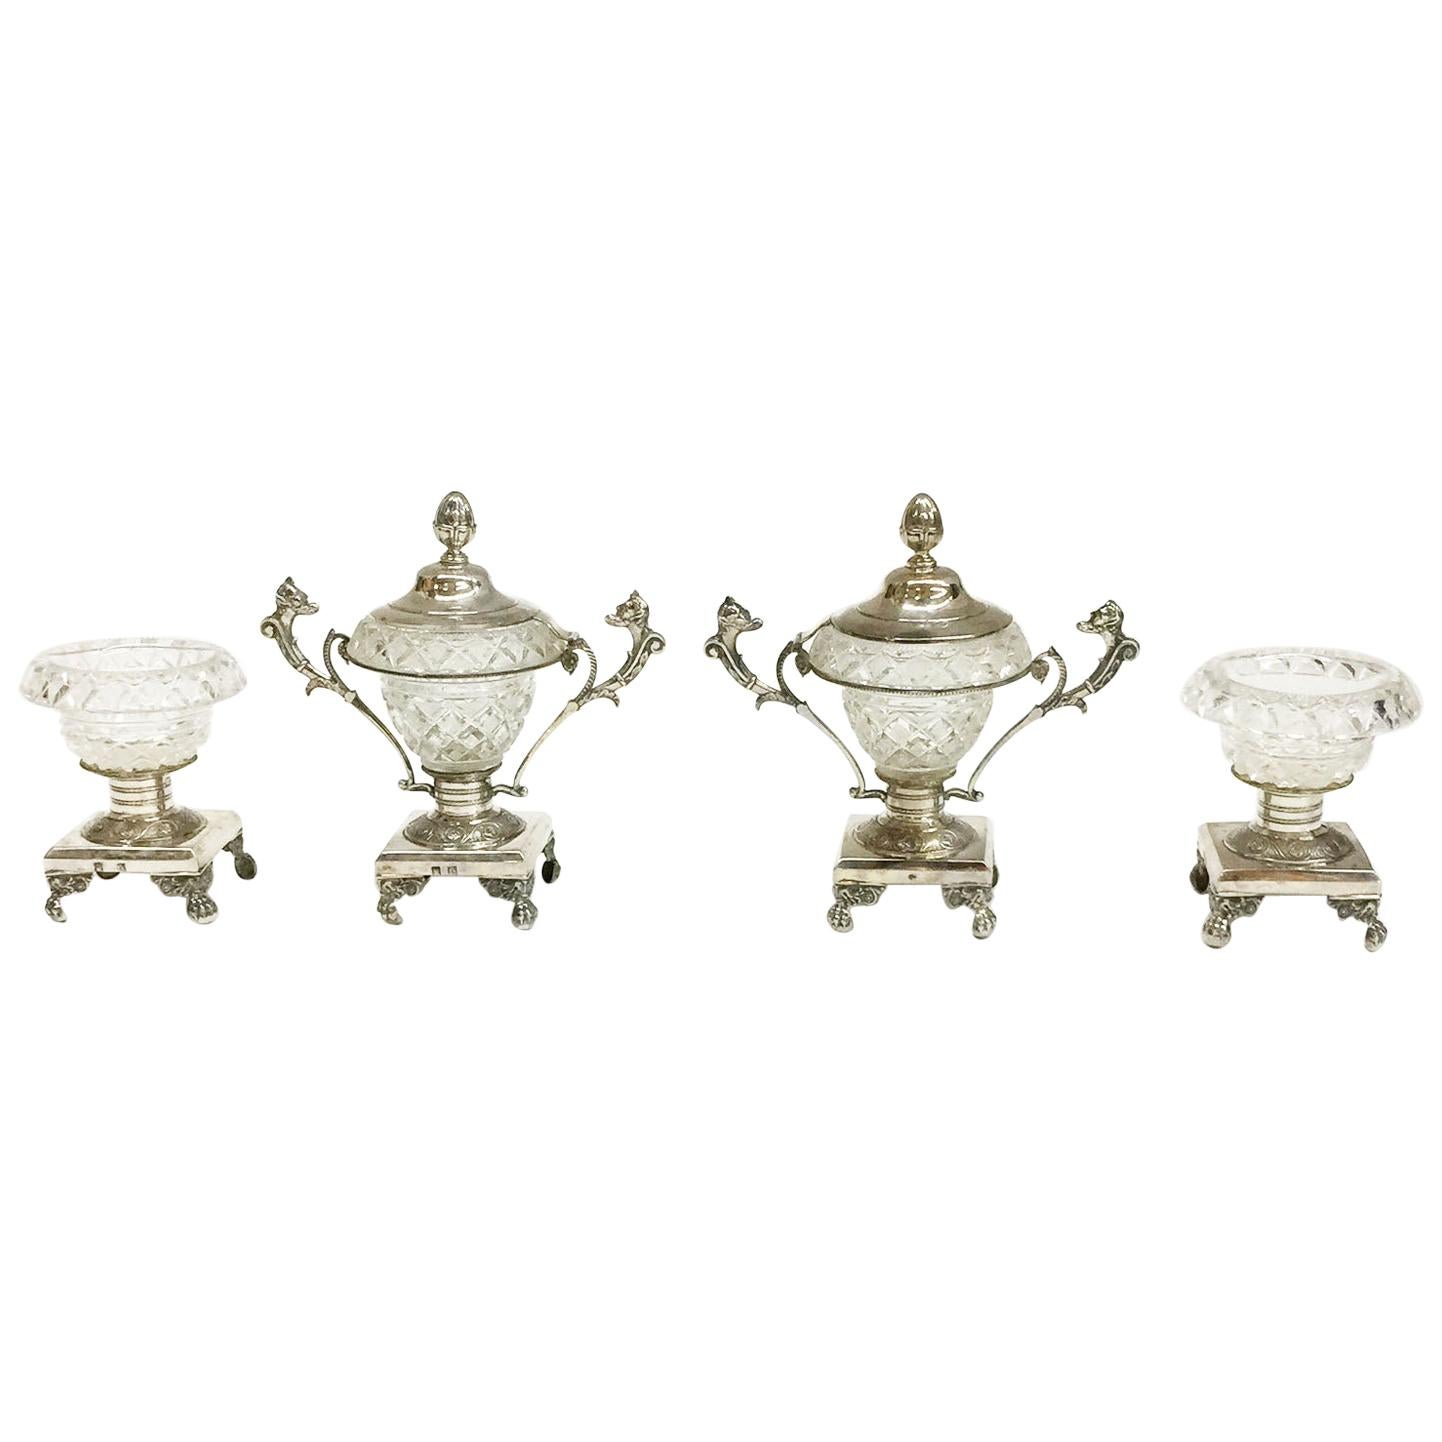 Silver with Crystal Serving Set with 2 Small Candy Dishes and 2 Salt Cellars